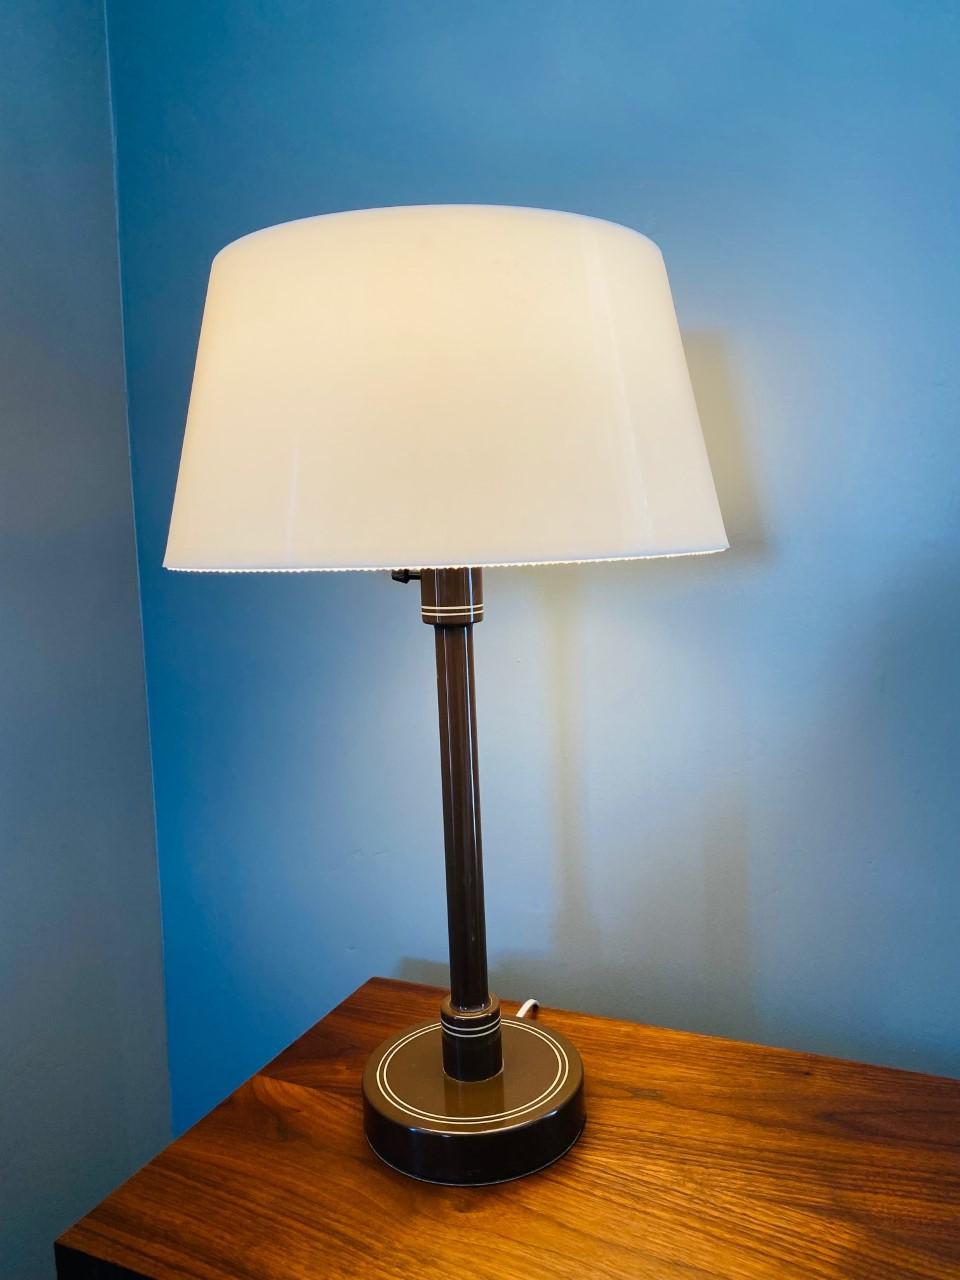 This piece was created in the 1960s. This was at the time a forward thinking futuristic design as the world looked beyond the atomic age and into space. Clean, minimal and current into today. This lamp presents a plastic shade and an enameled brown